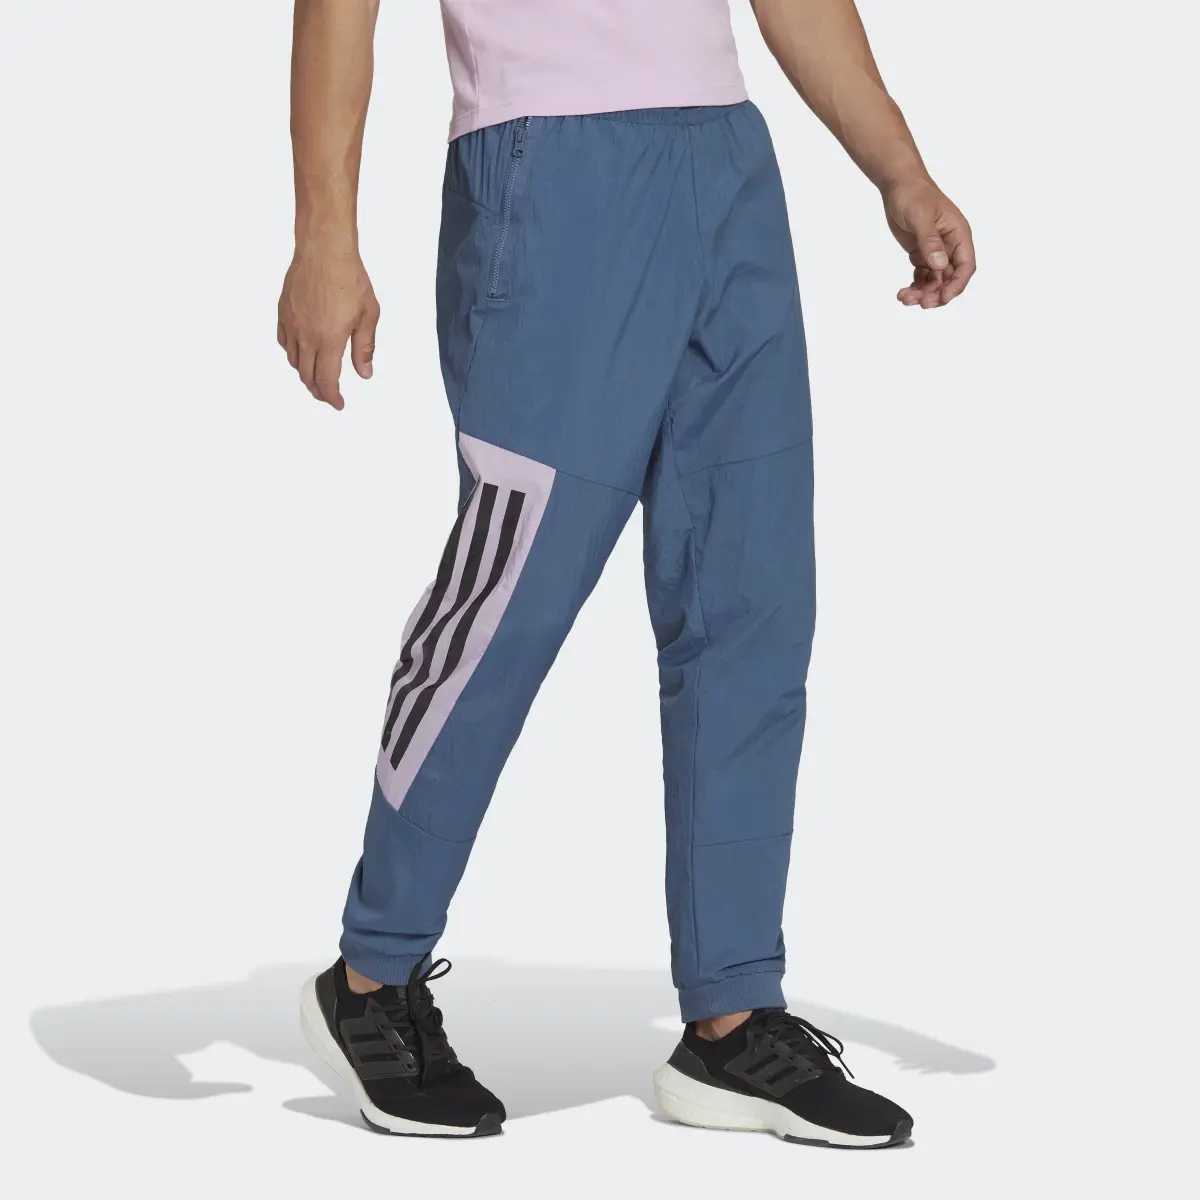 Adidas Future Icons 3-Stripes Woven Tracksuit Bottoms. 3